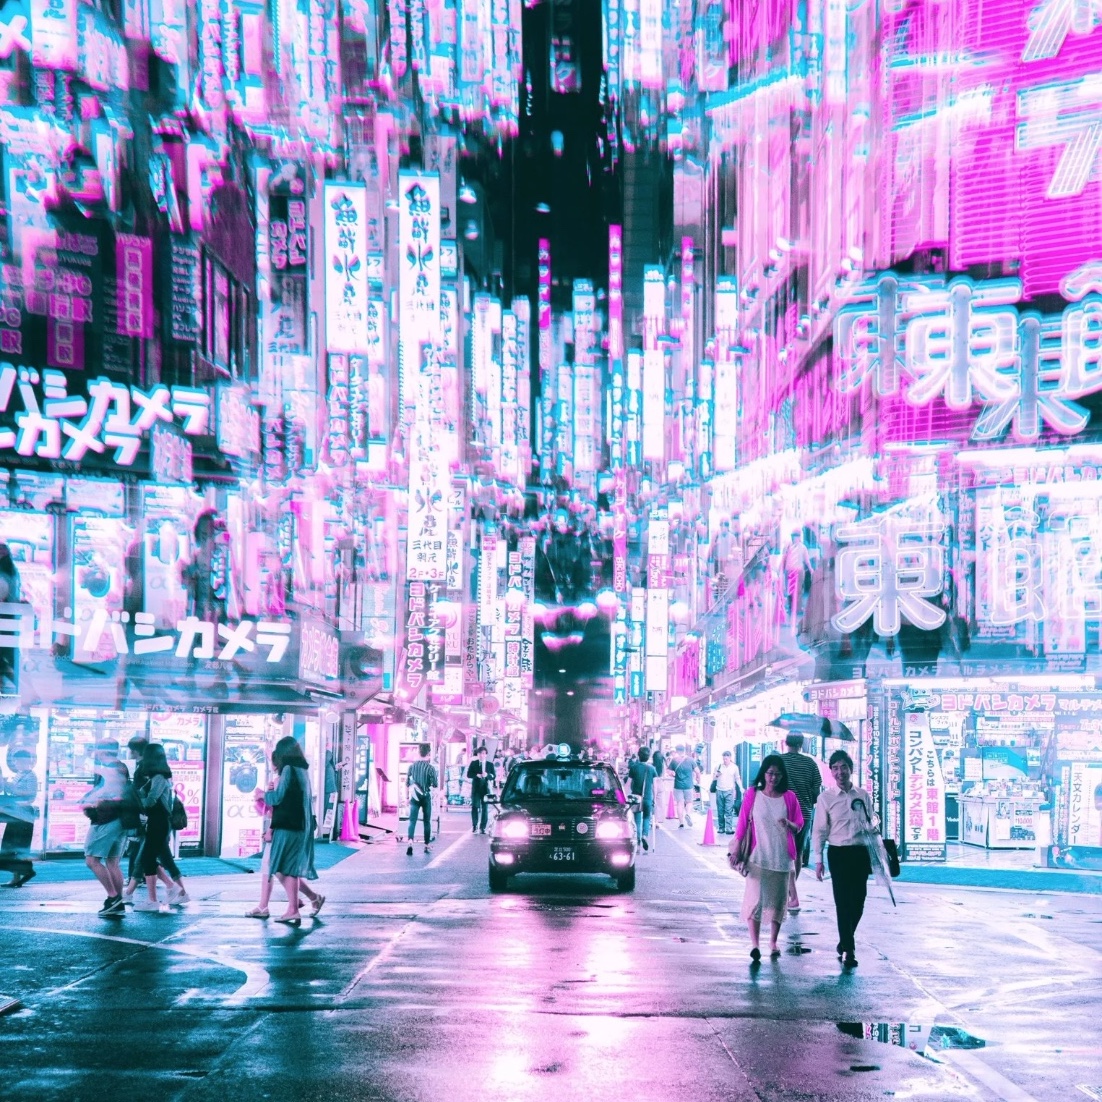 Trippy shots of Asian cities with a fractal lens / Boing Boing